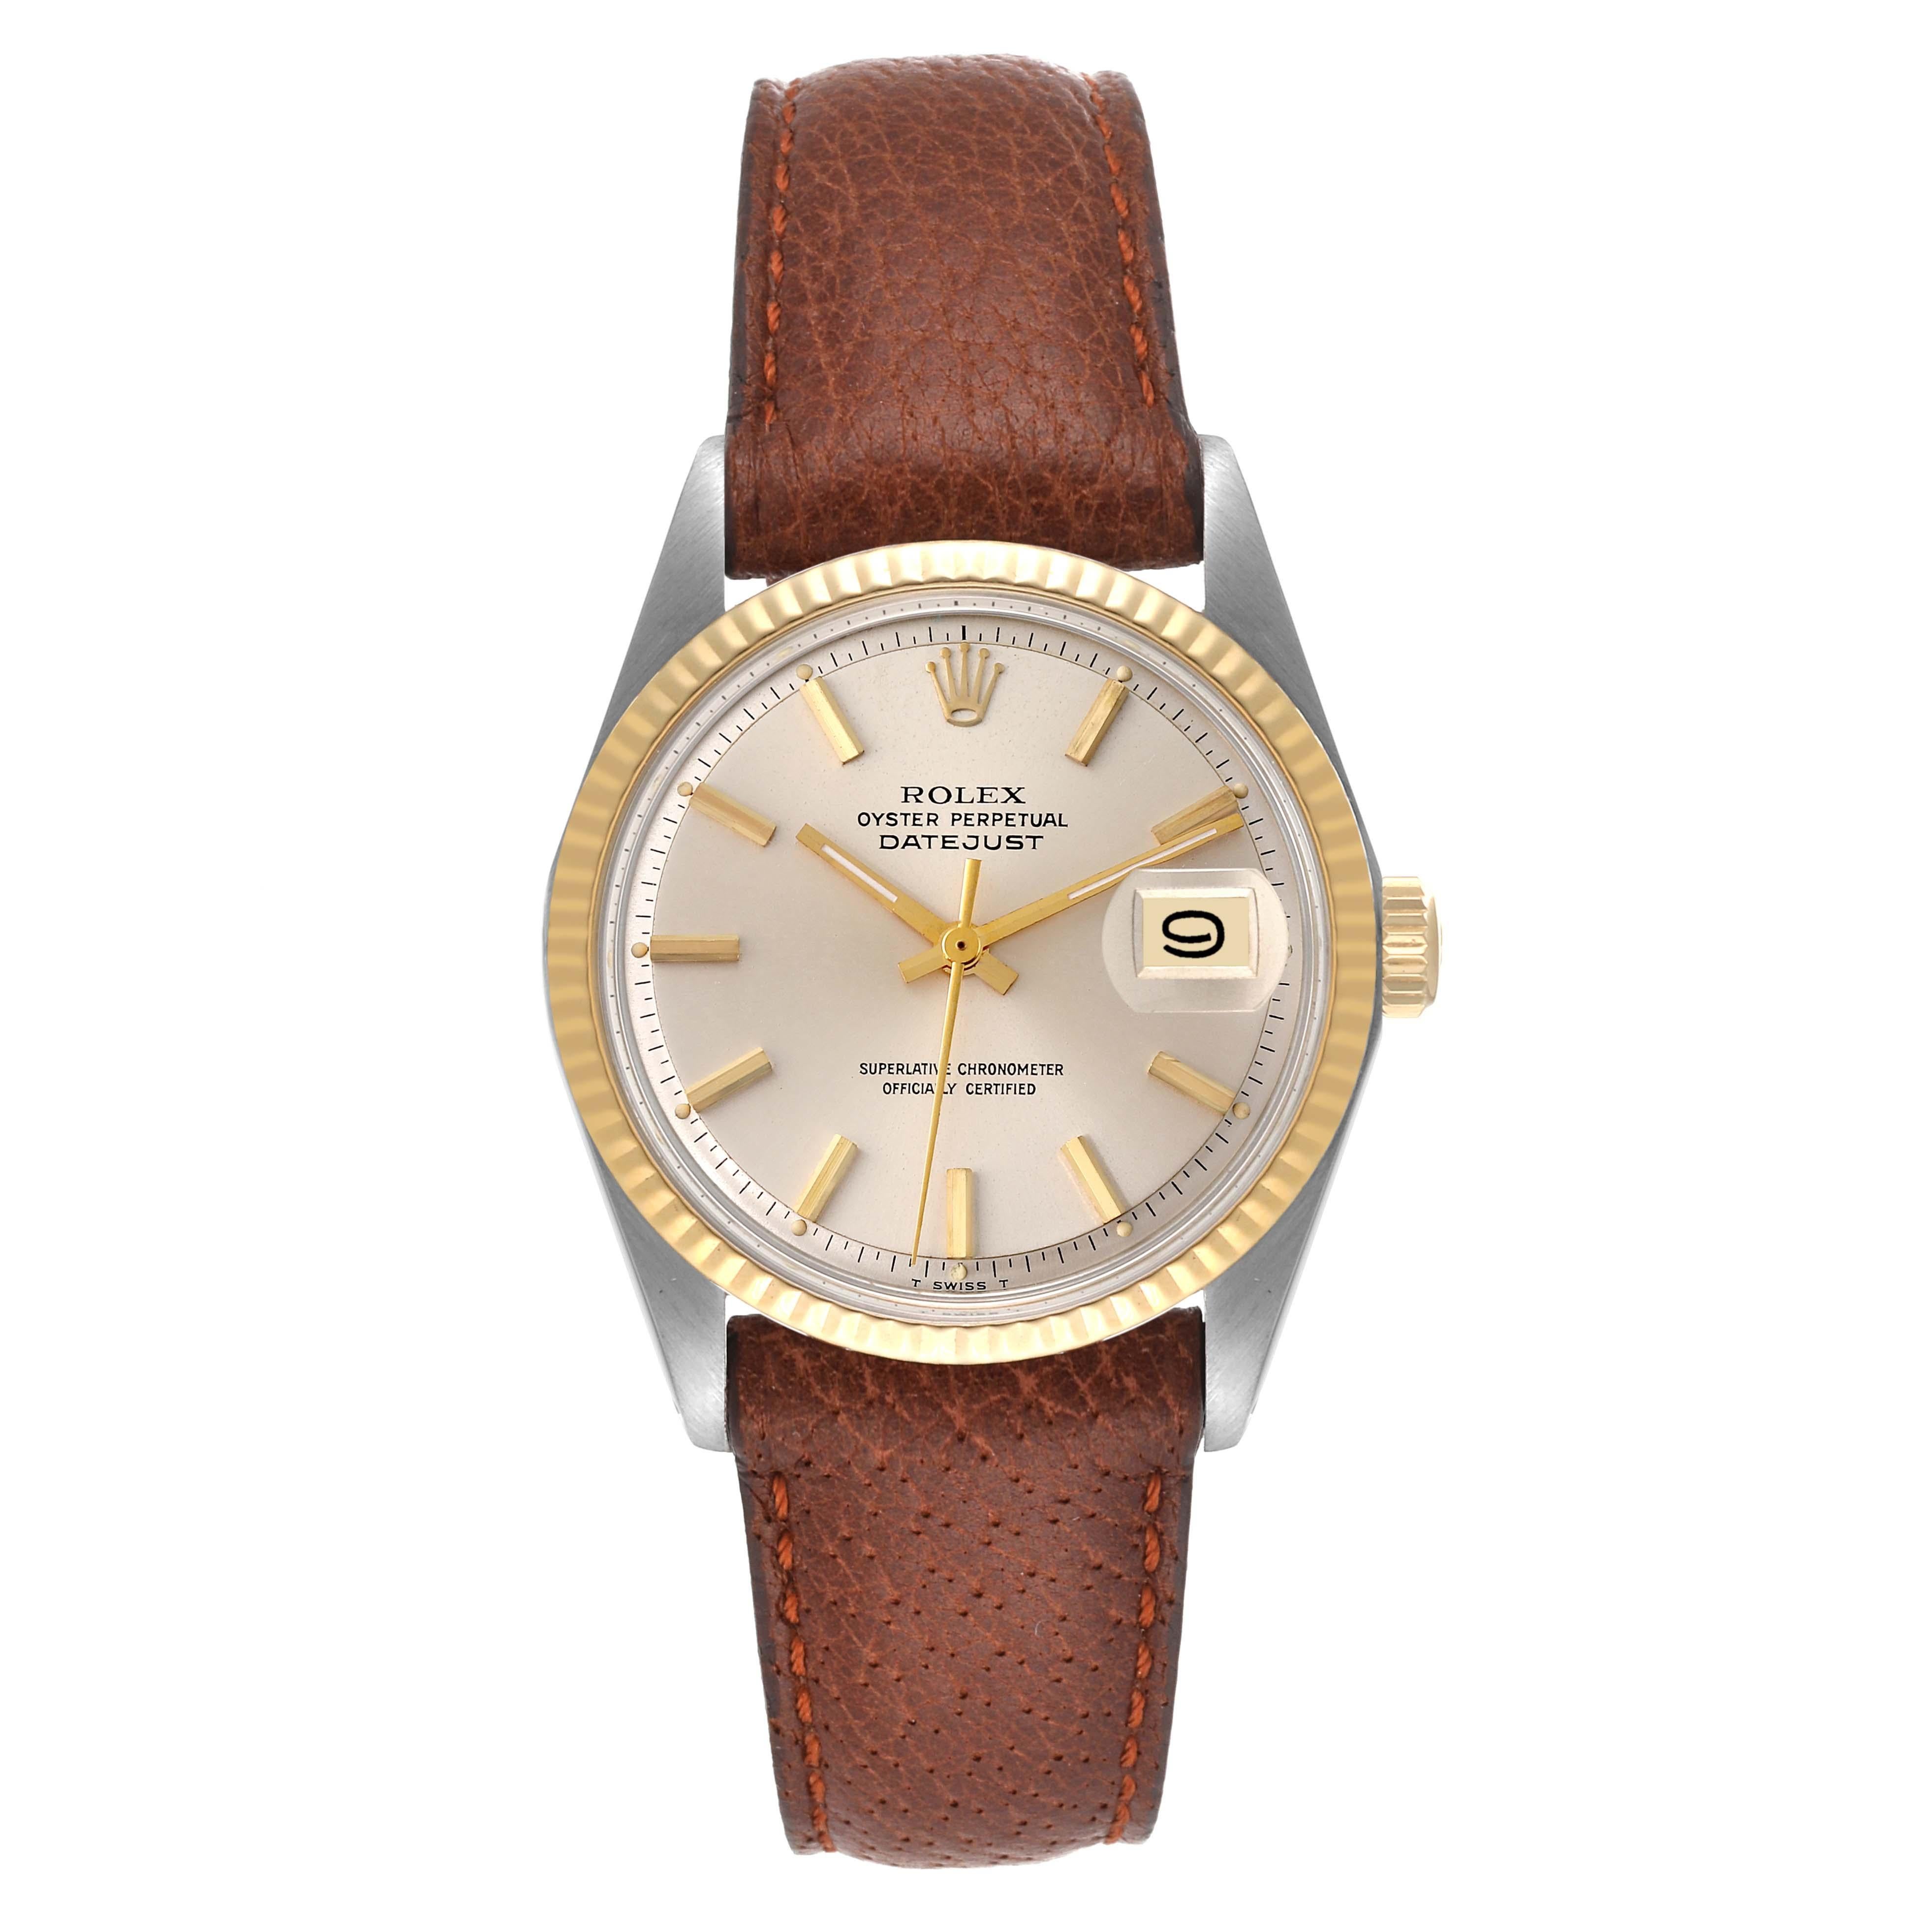 Rolex Datejust Steel Yellow Gold Silver Dial Vintage Mens Watch 1601. Officially certified chronometer automatic self-winding movement. Stainless steel case 36 mm in diameter. Rolex logo on an 18k yellow gold crown. 18k yellow gold fluted bezel.